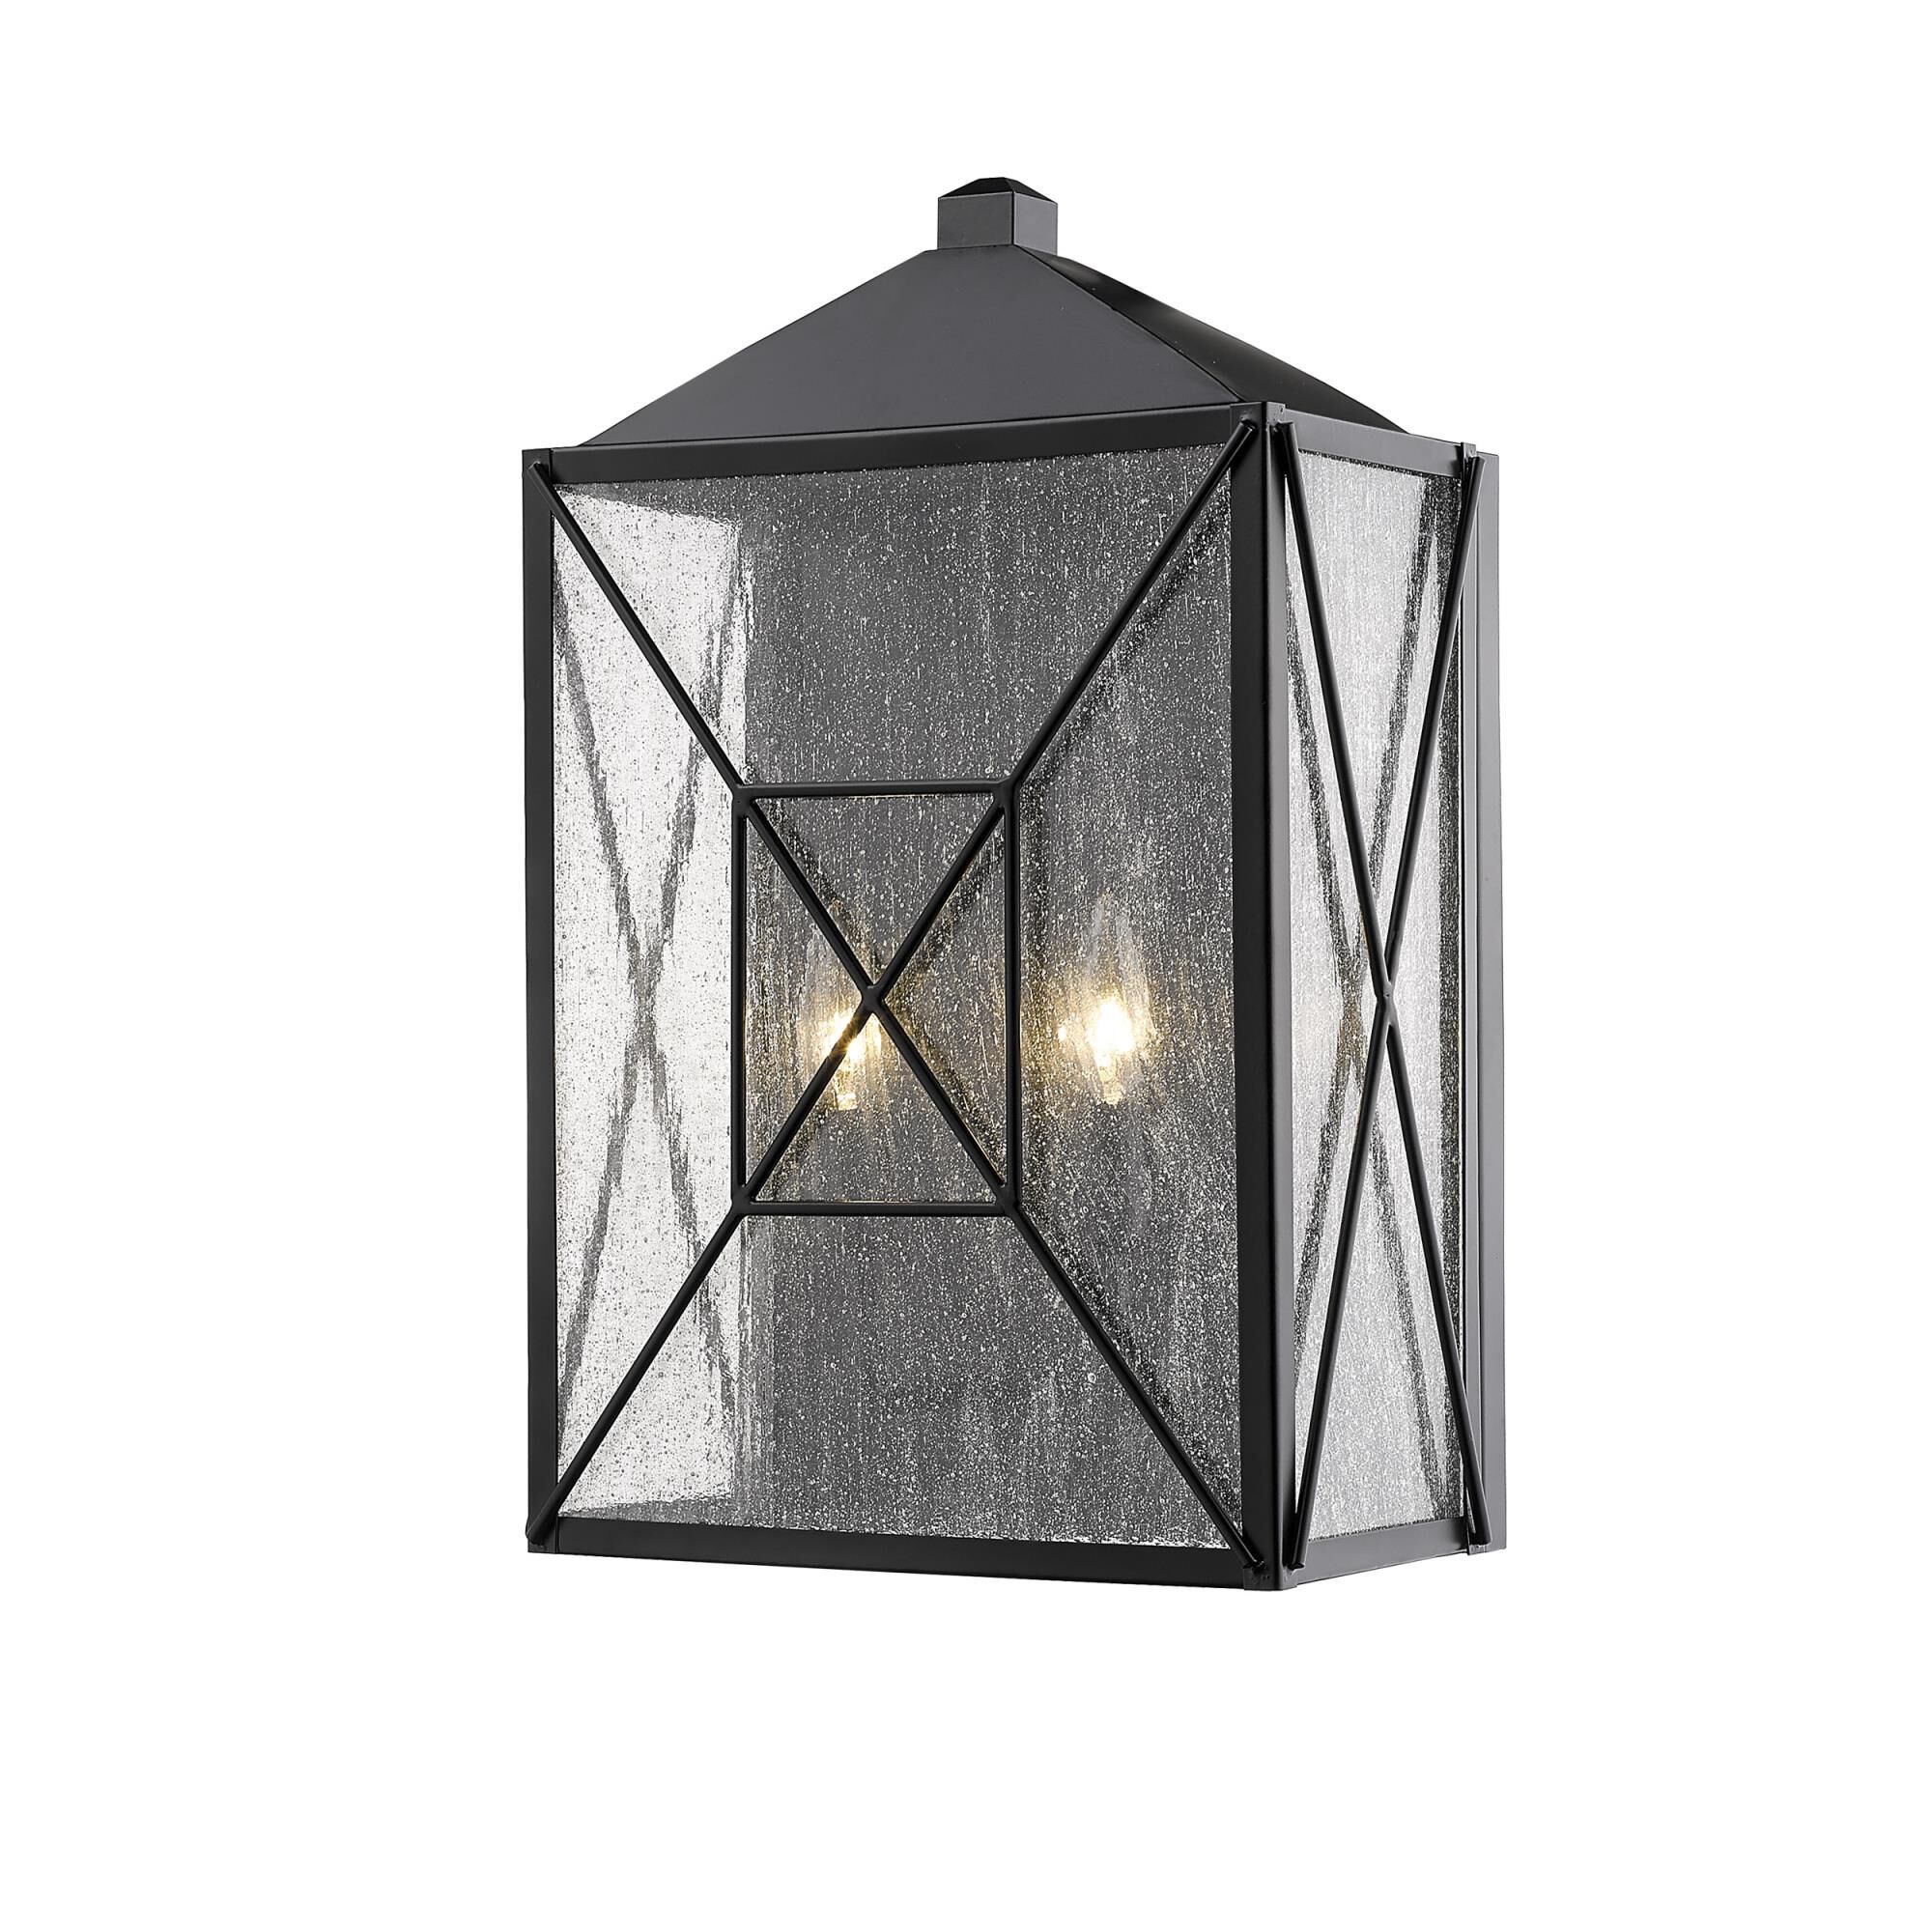 New


Caswell 18 Inch Tall 2 Light Outdoor Wall Light by Millennium Lighting

Capitol ID: 3855281... | 1800 Lighting